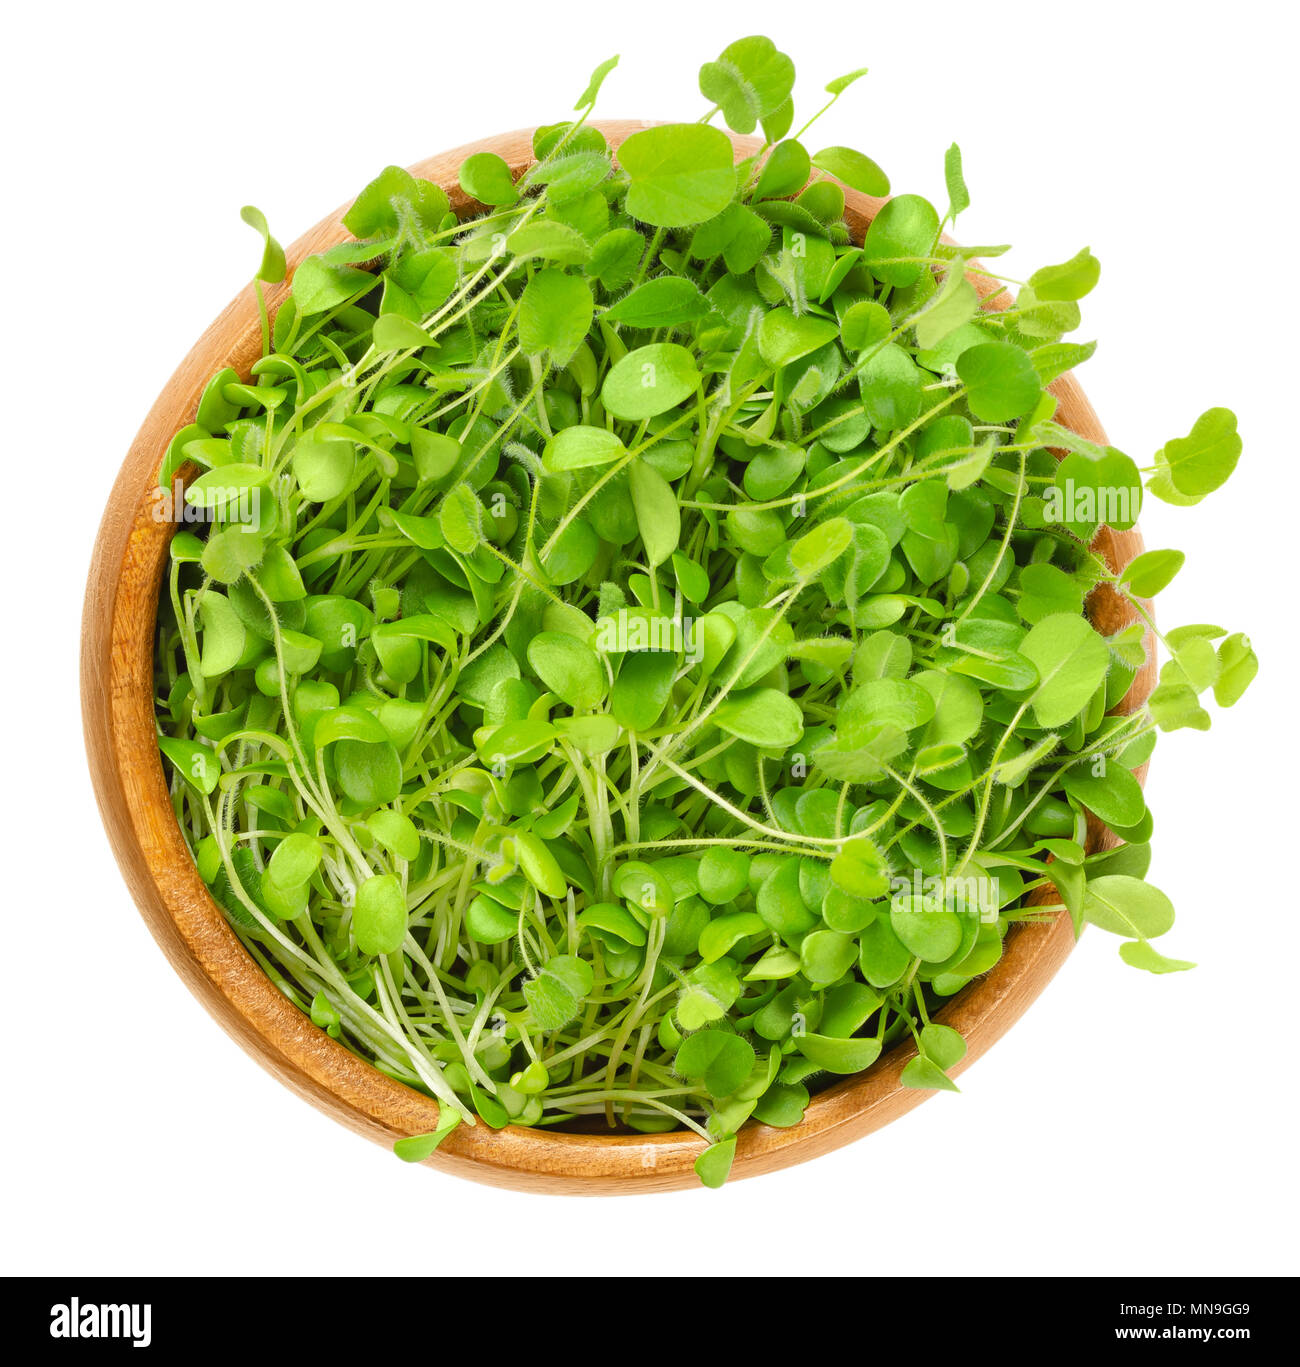 Crimson clover microgreen in wooden bowl. Young plants, seedlings, sprouts, shoots and cotyledons of Trifolium incarnatum, also called Italian clover. Stock Photo